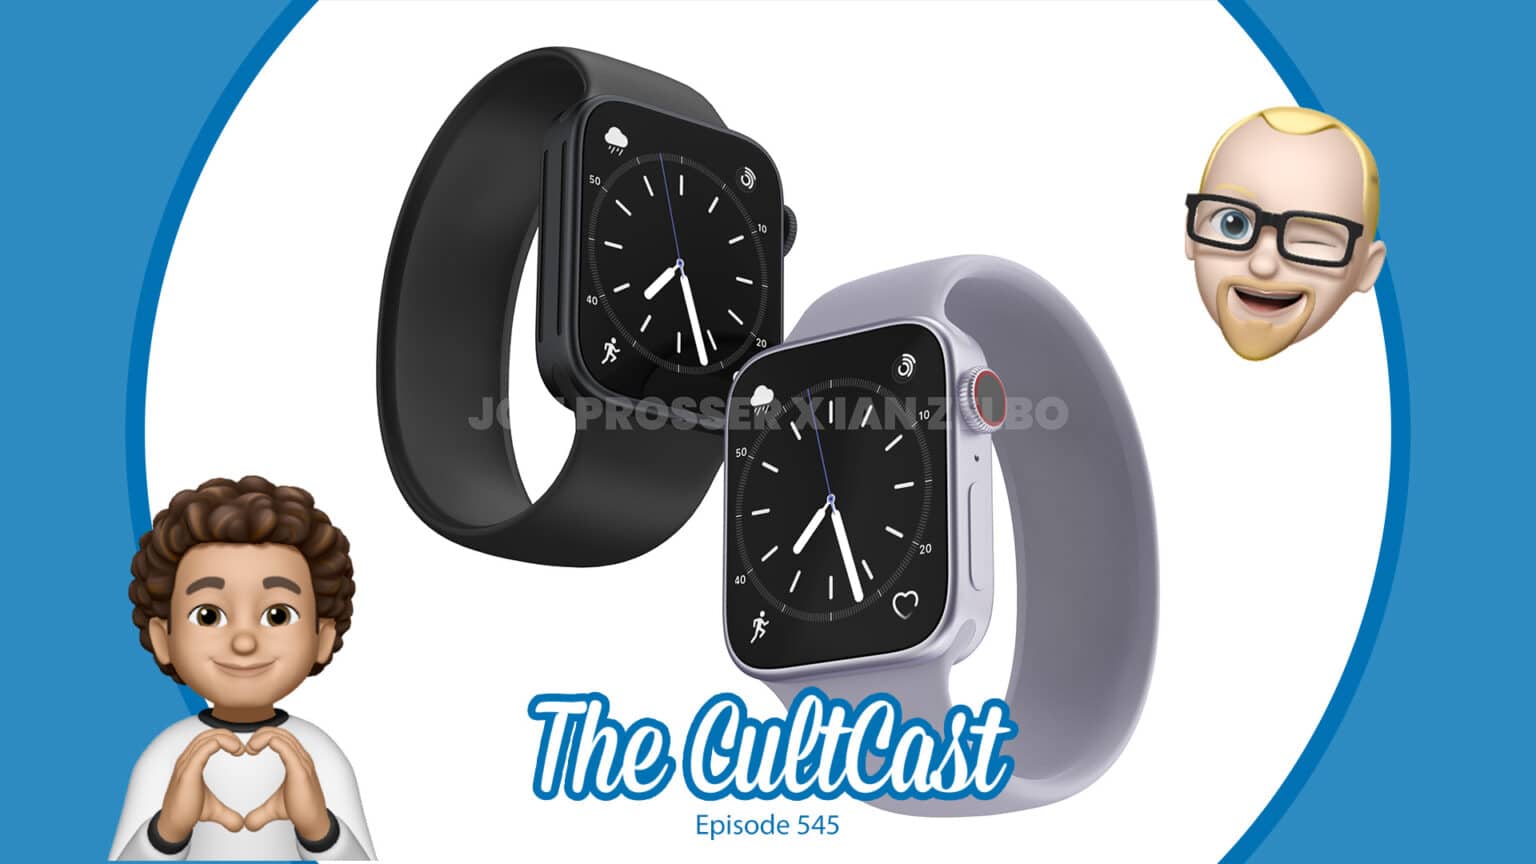 The CultCast podcast: Will Apple Watch Series 8 bring the redesign we've been waiting for?